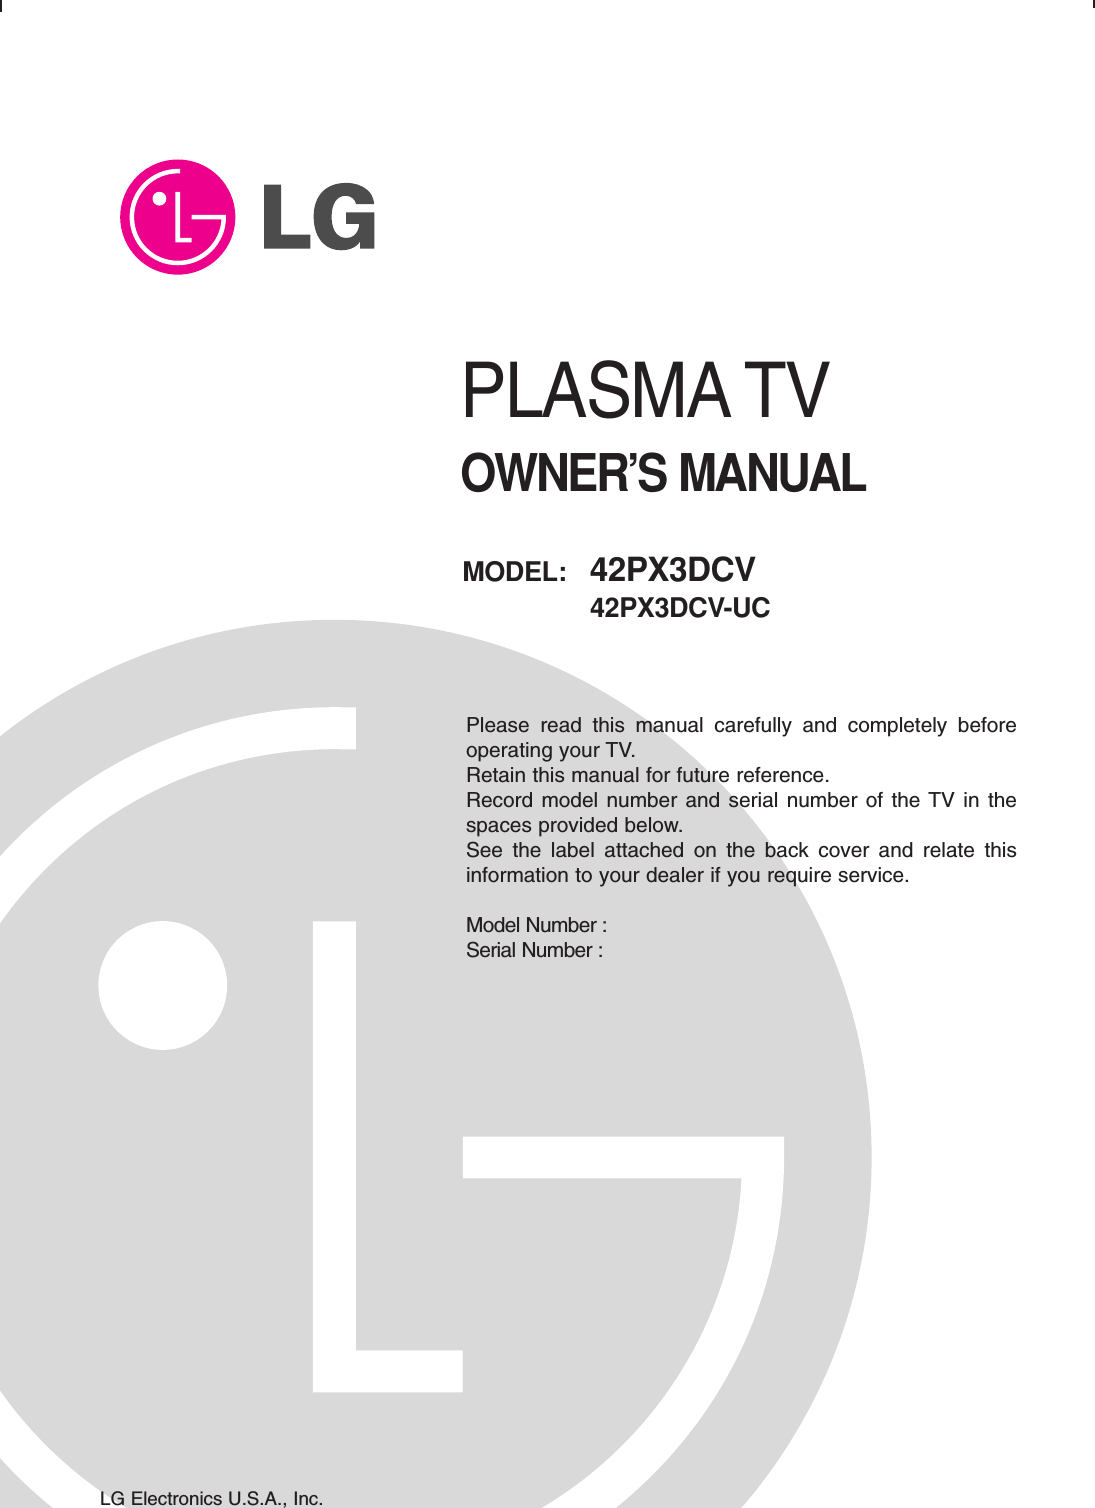 PLASMA TVOWNER’S MANUALPlease read this manual carefully and completely beforeoperating your TV. Retain this manual for future reference.Record model number and serial number of the TV in thespaces provided below. See the label attached on the back cover and relate thisinformation to your dealer if you require service.Model Number : Serial Number : MODEL:   42PX3DCV42PX3DCV-UCLG Electronics U.S.A., Inc.